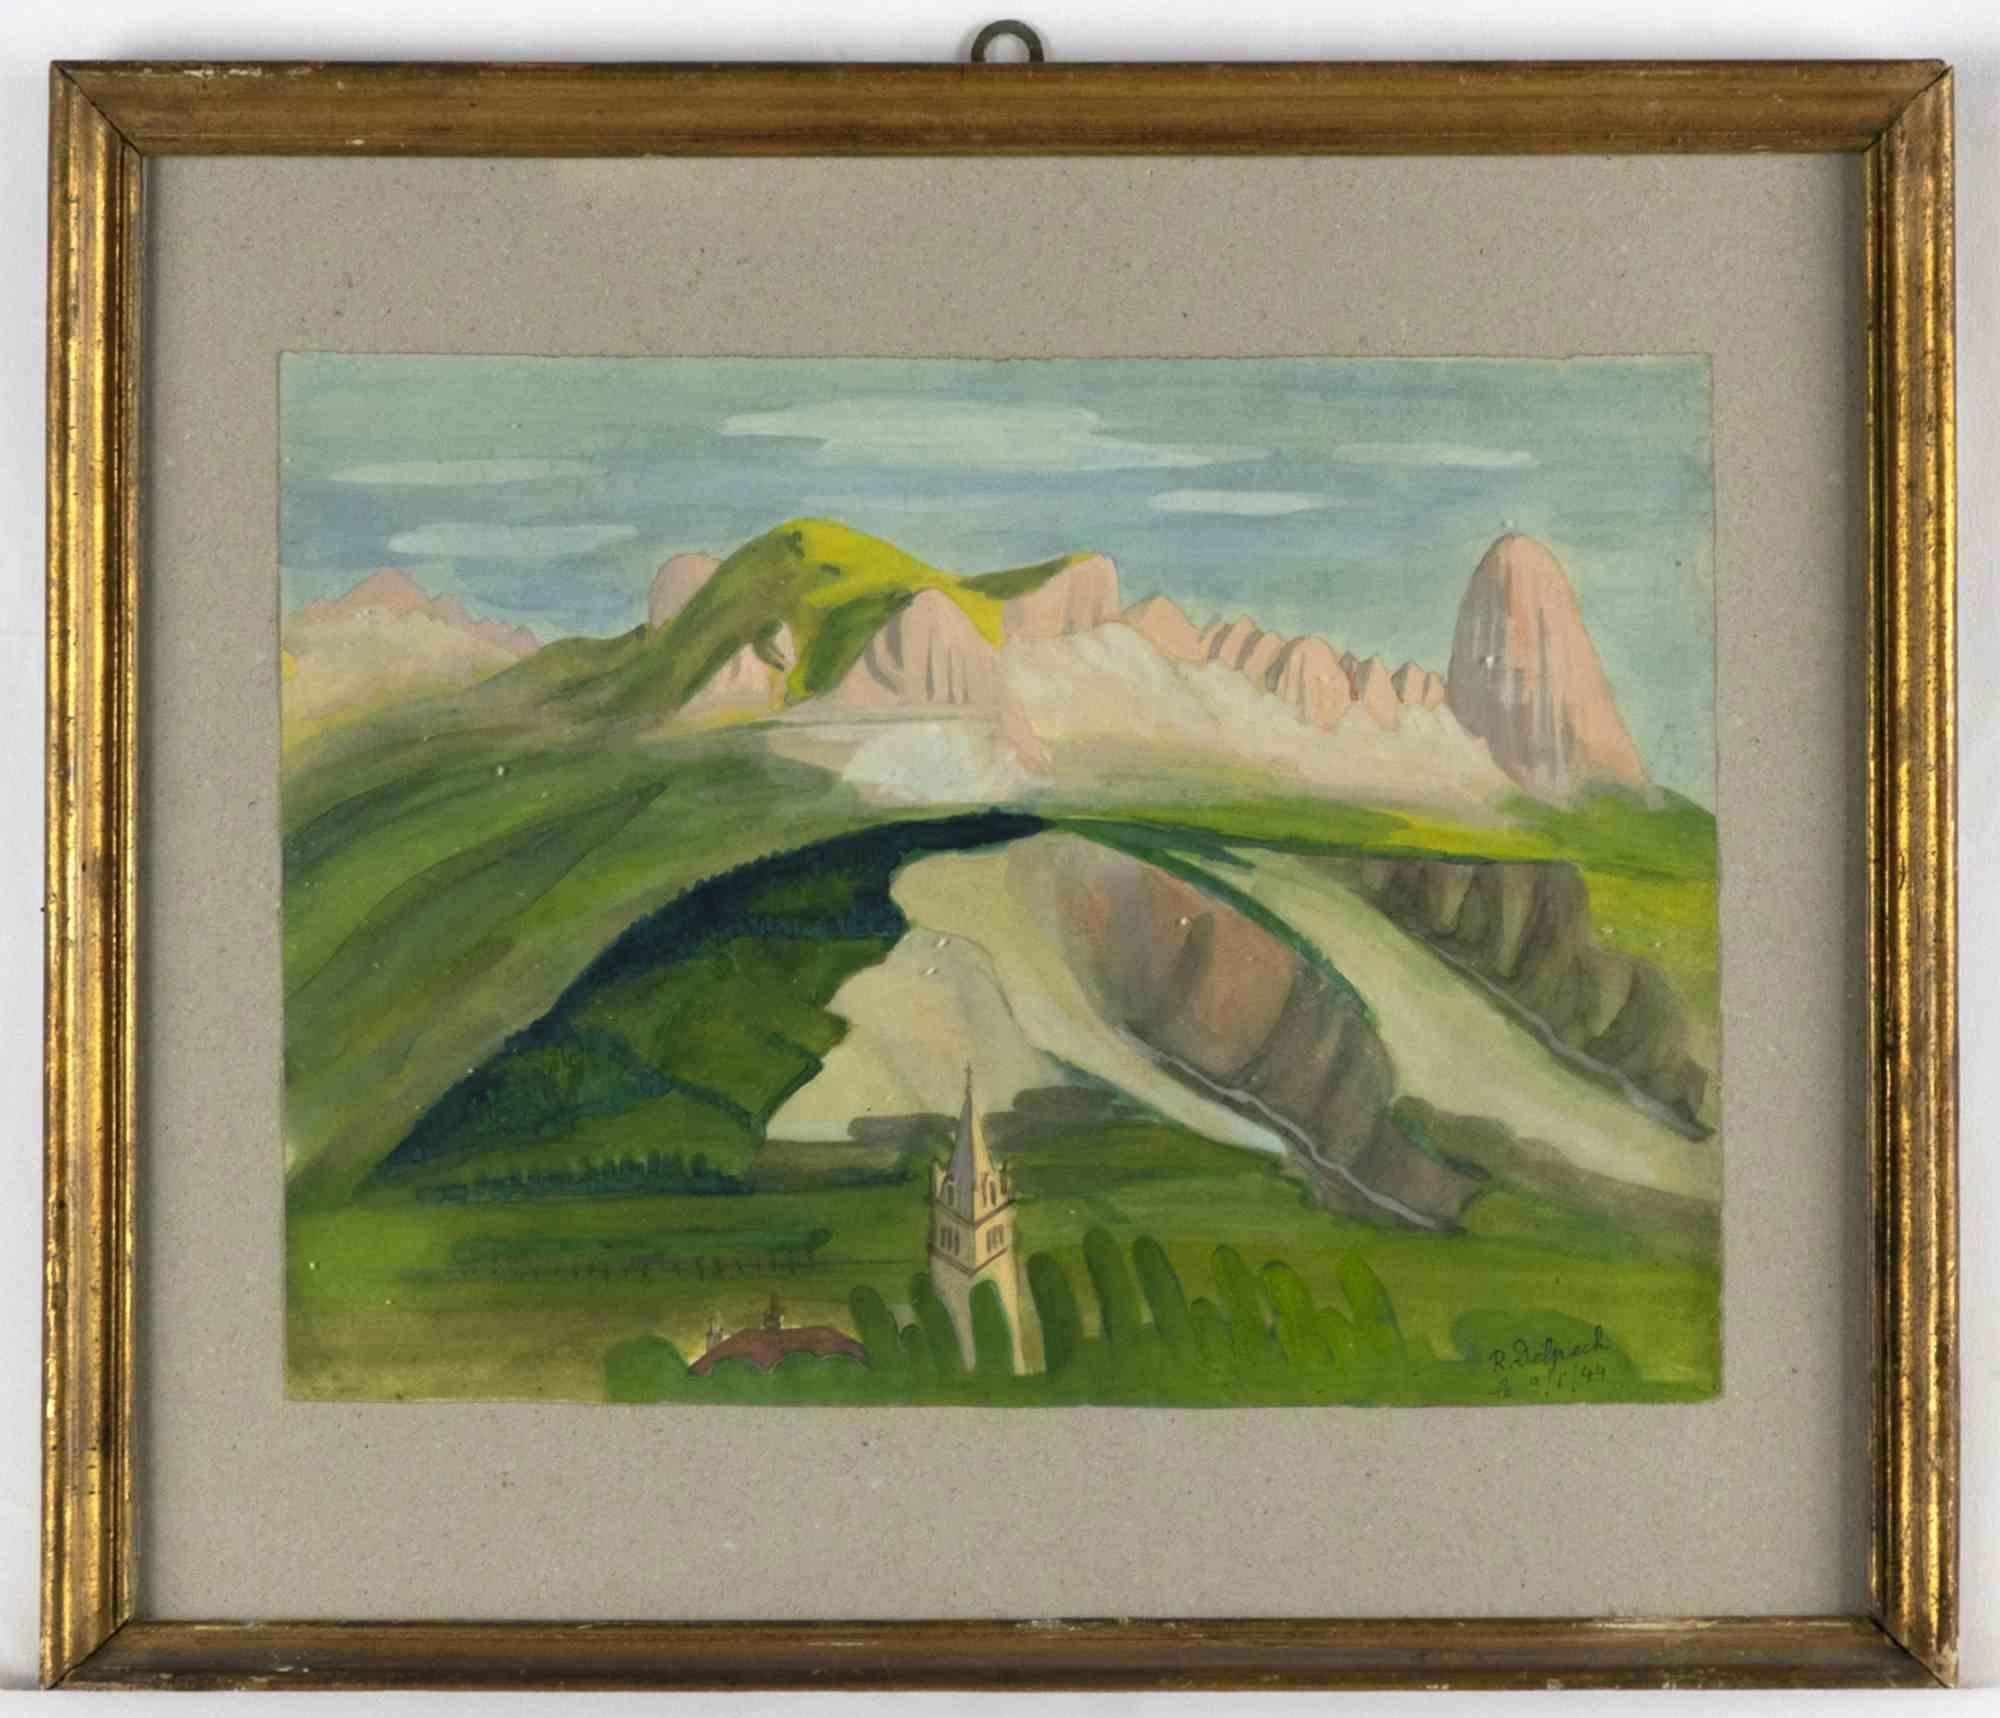 Mountains is an original drawing in watercolor on cardboard realized by Jean-Raymond Delpech (1916-1988) in 1944. 

Hand-signed and dated on the lower right. The state of preservation of the artwork is good.

Includes frame: 40.5 x 2.5 x 46.5 